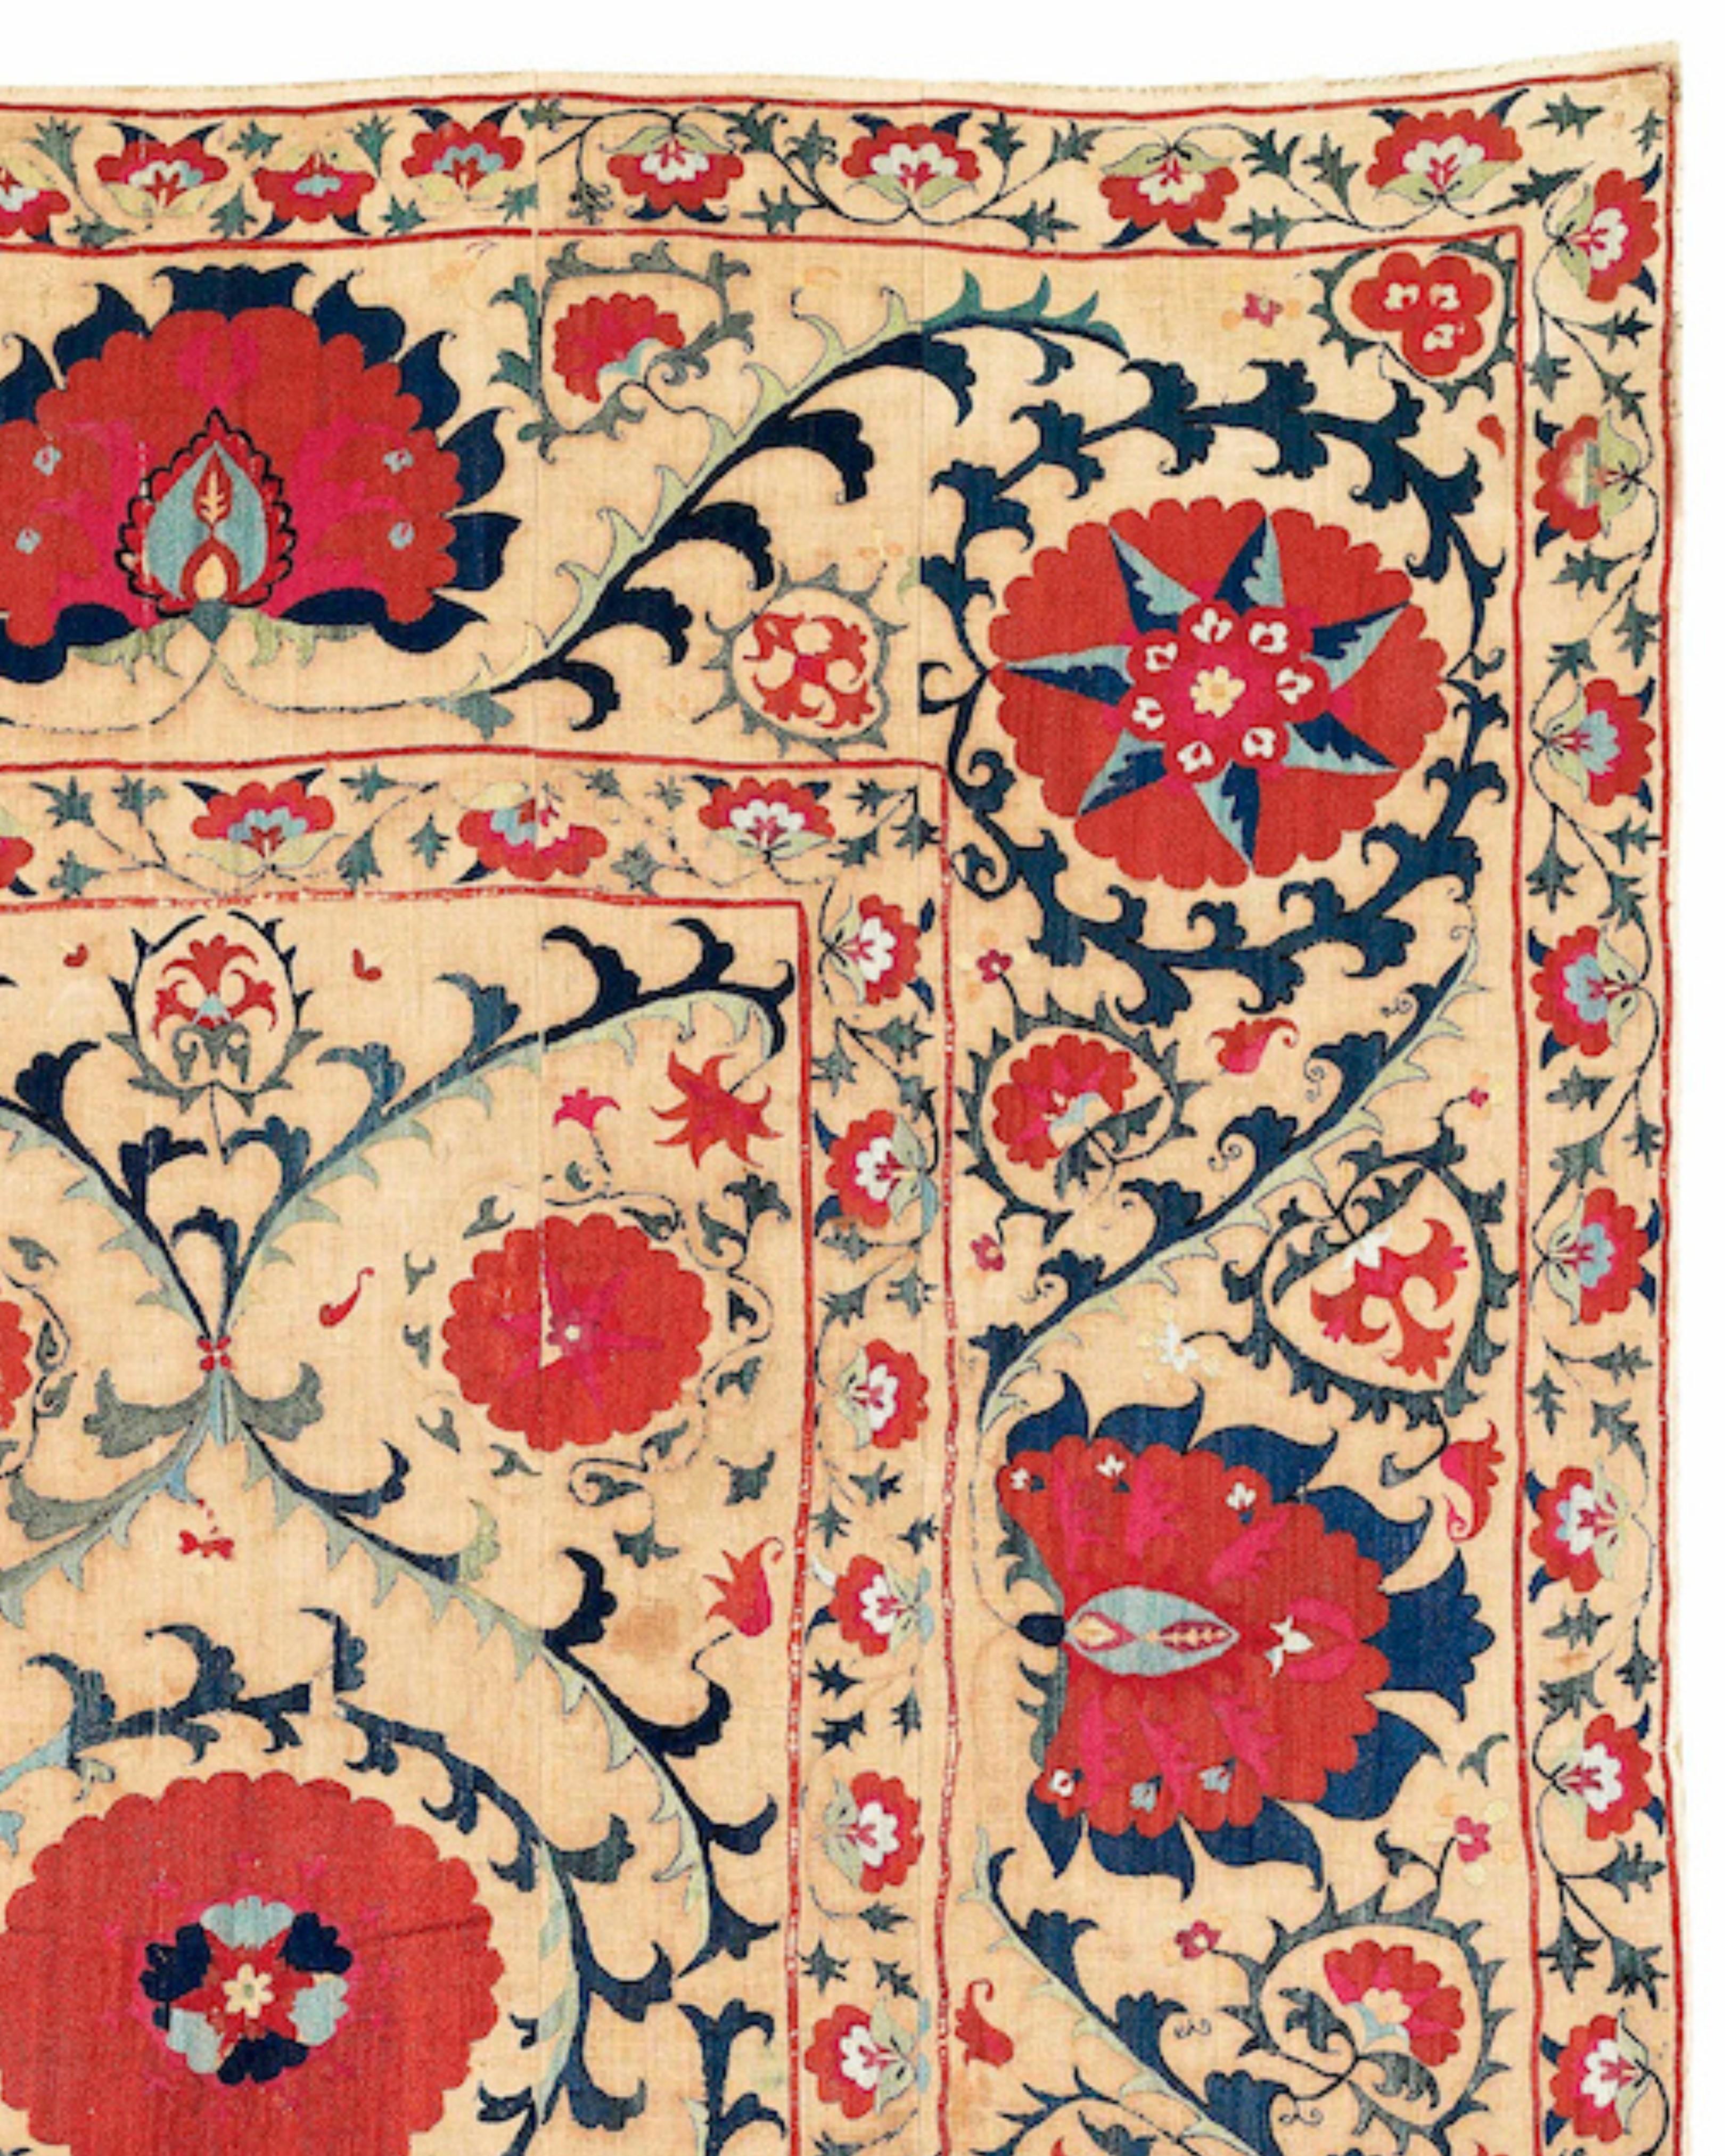 18th Century and Earlier Antique Uzbek Suzani Embroidery Rug, c. 1800 For Sale